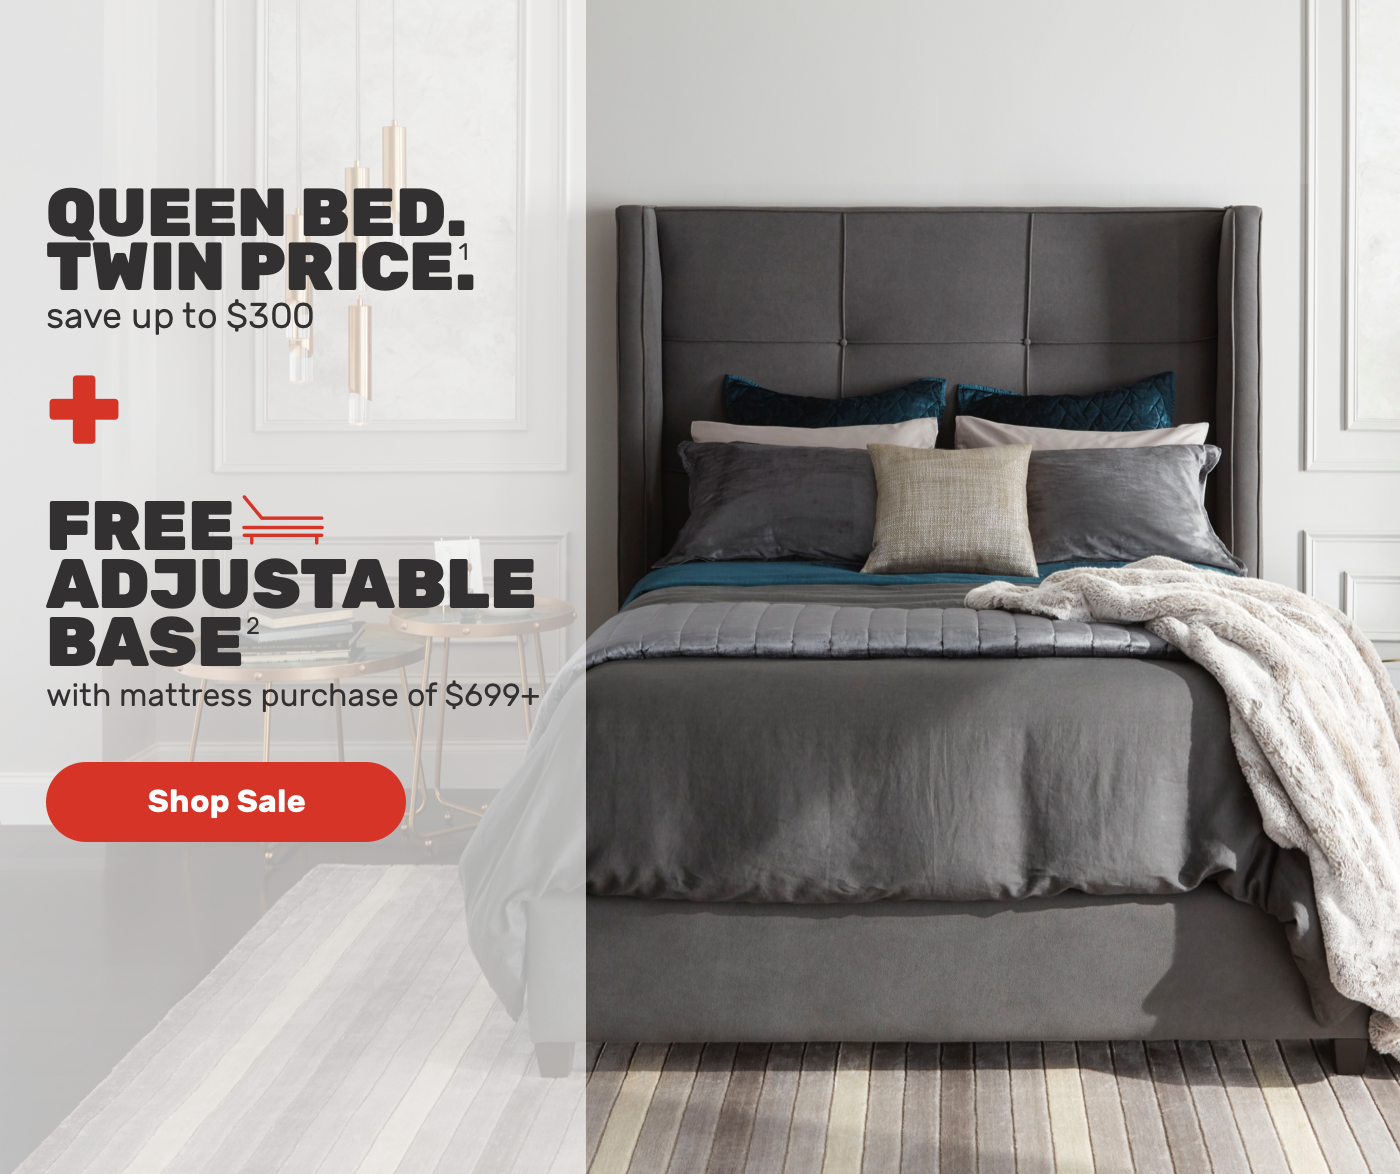 Queen Bed. Twin Price.save up to $300FREE ADJUSTABLE BASE with mattress purchase of $699+ Shop Sale